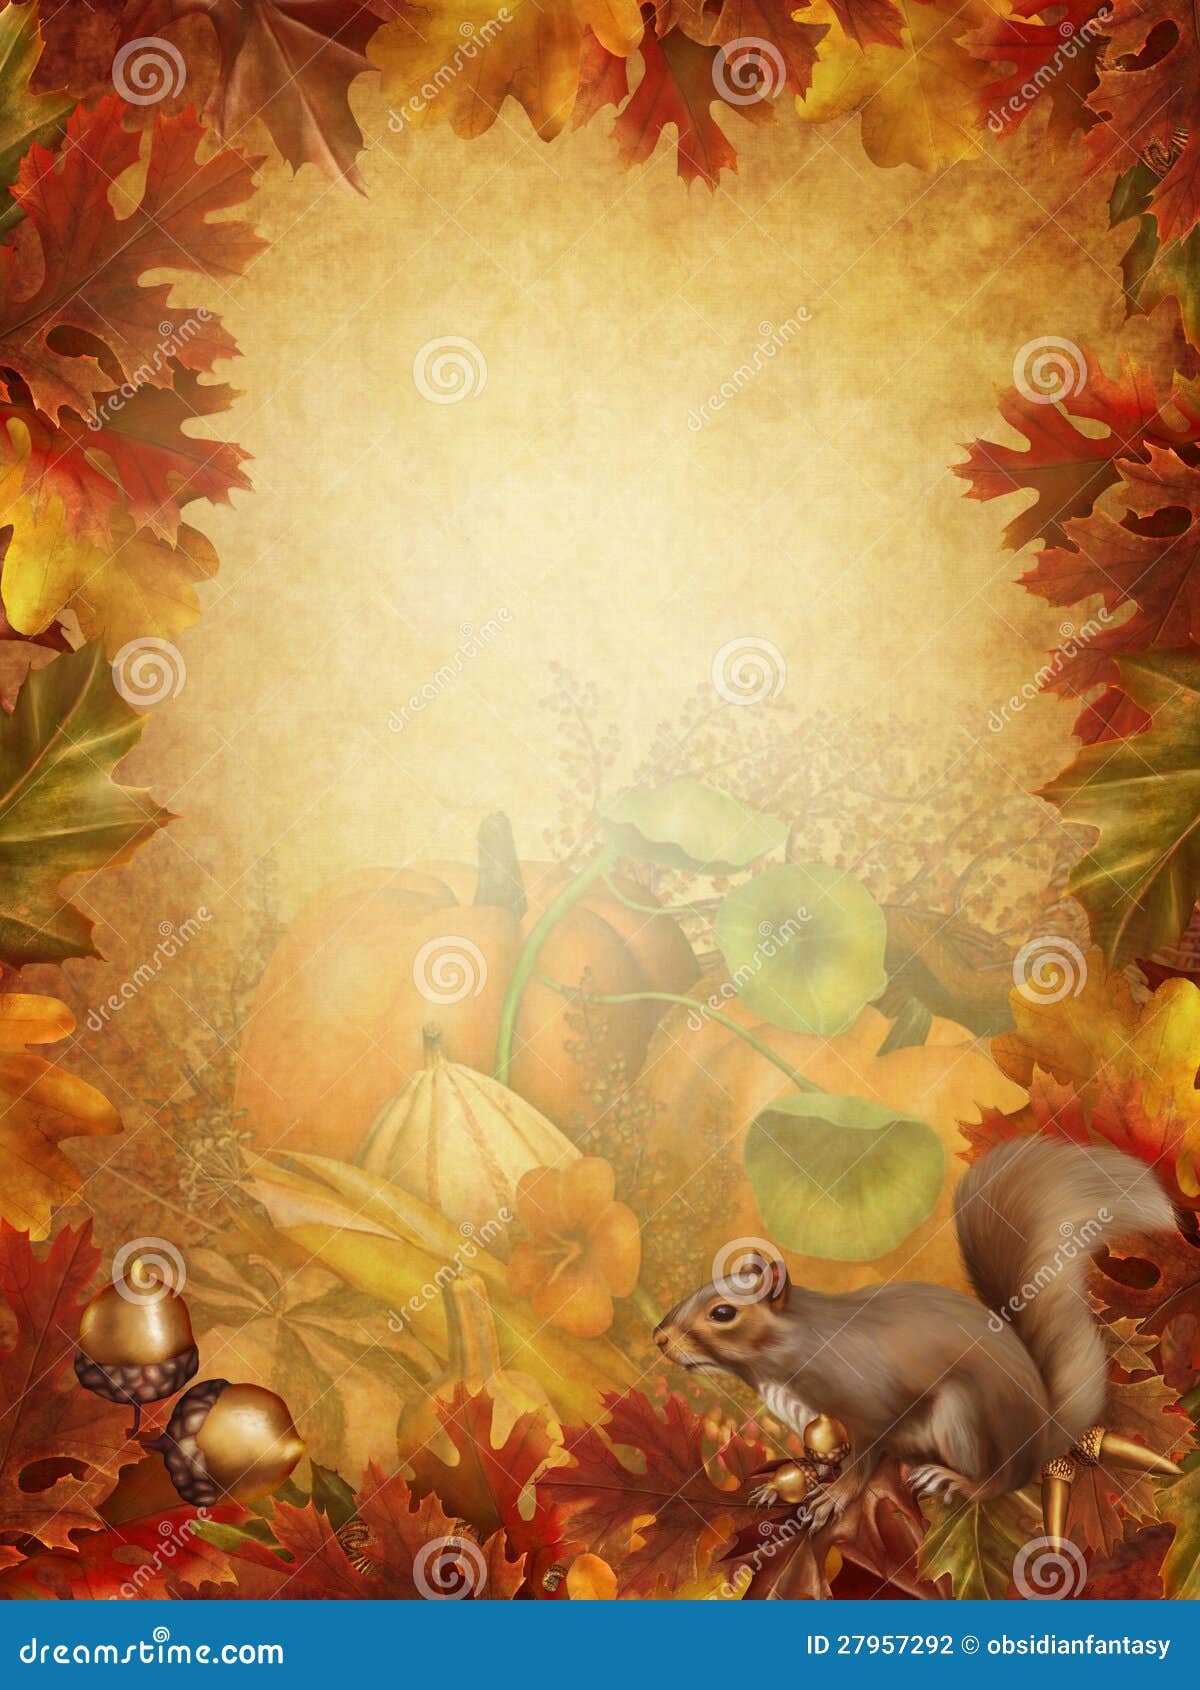 credit themes tumblr no Squirrel With Autumn Background Stock A Photography